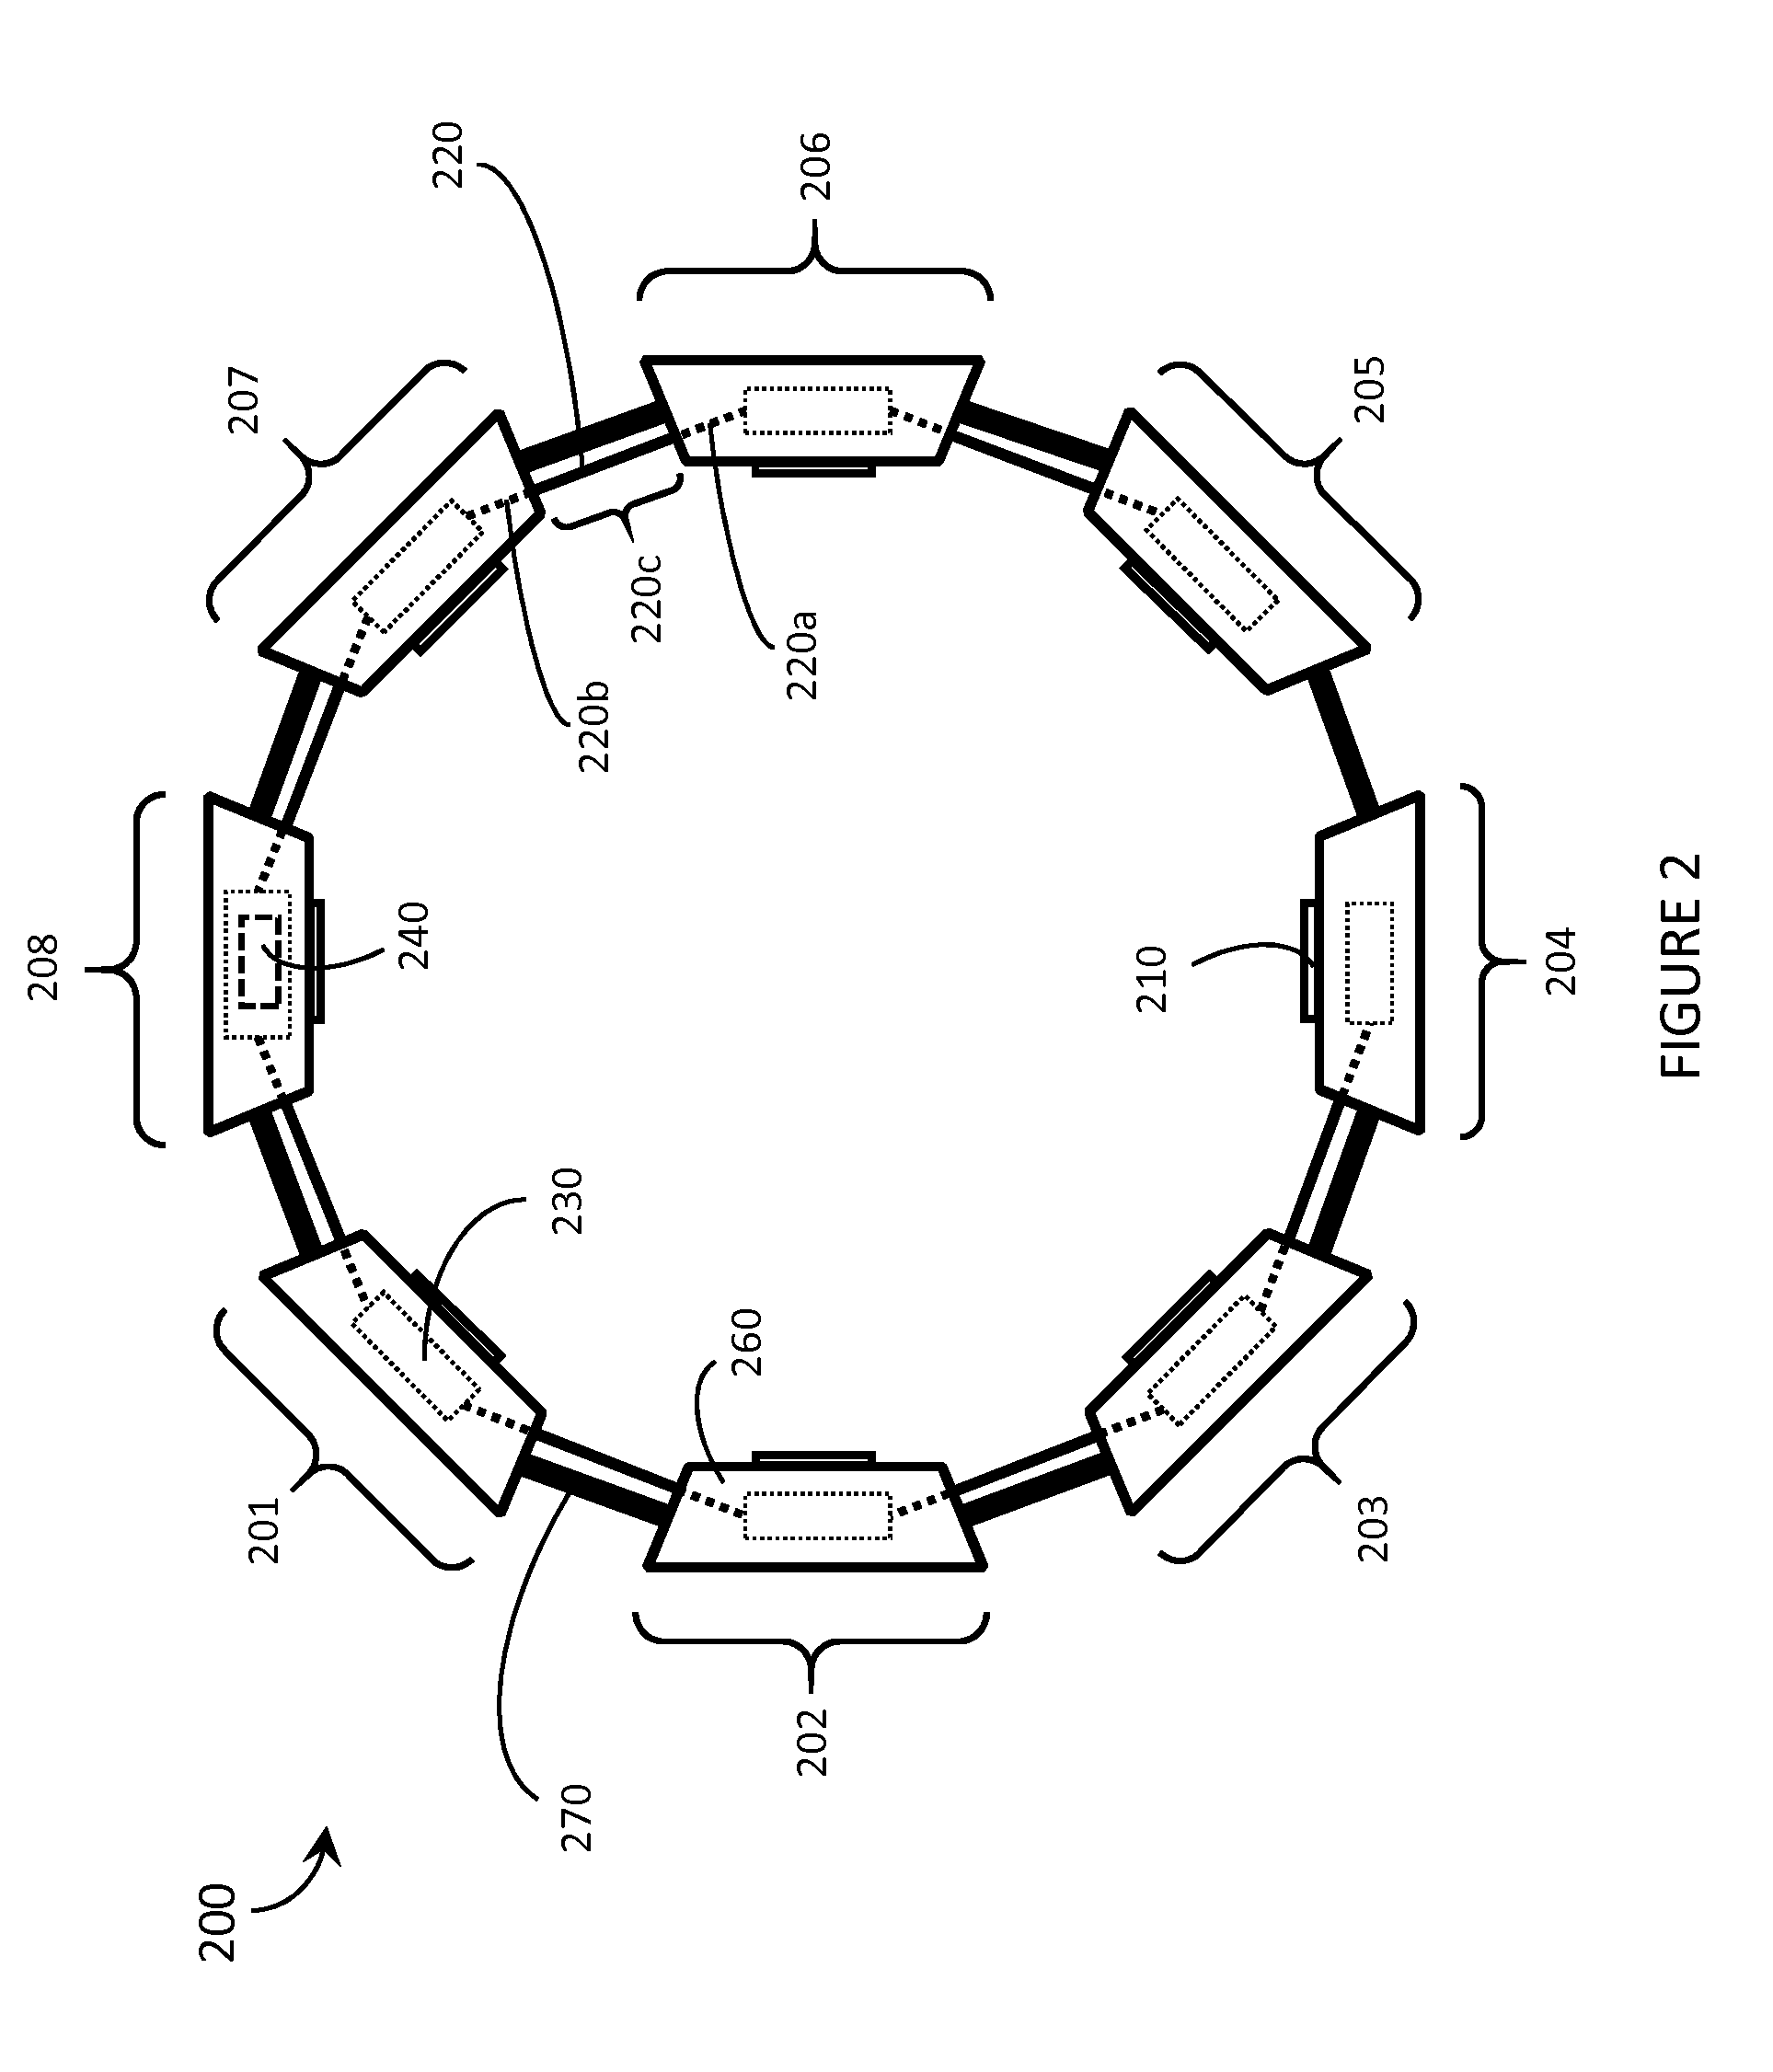 Systems, articles and methods for signal routing in wearable electronic devices